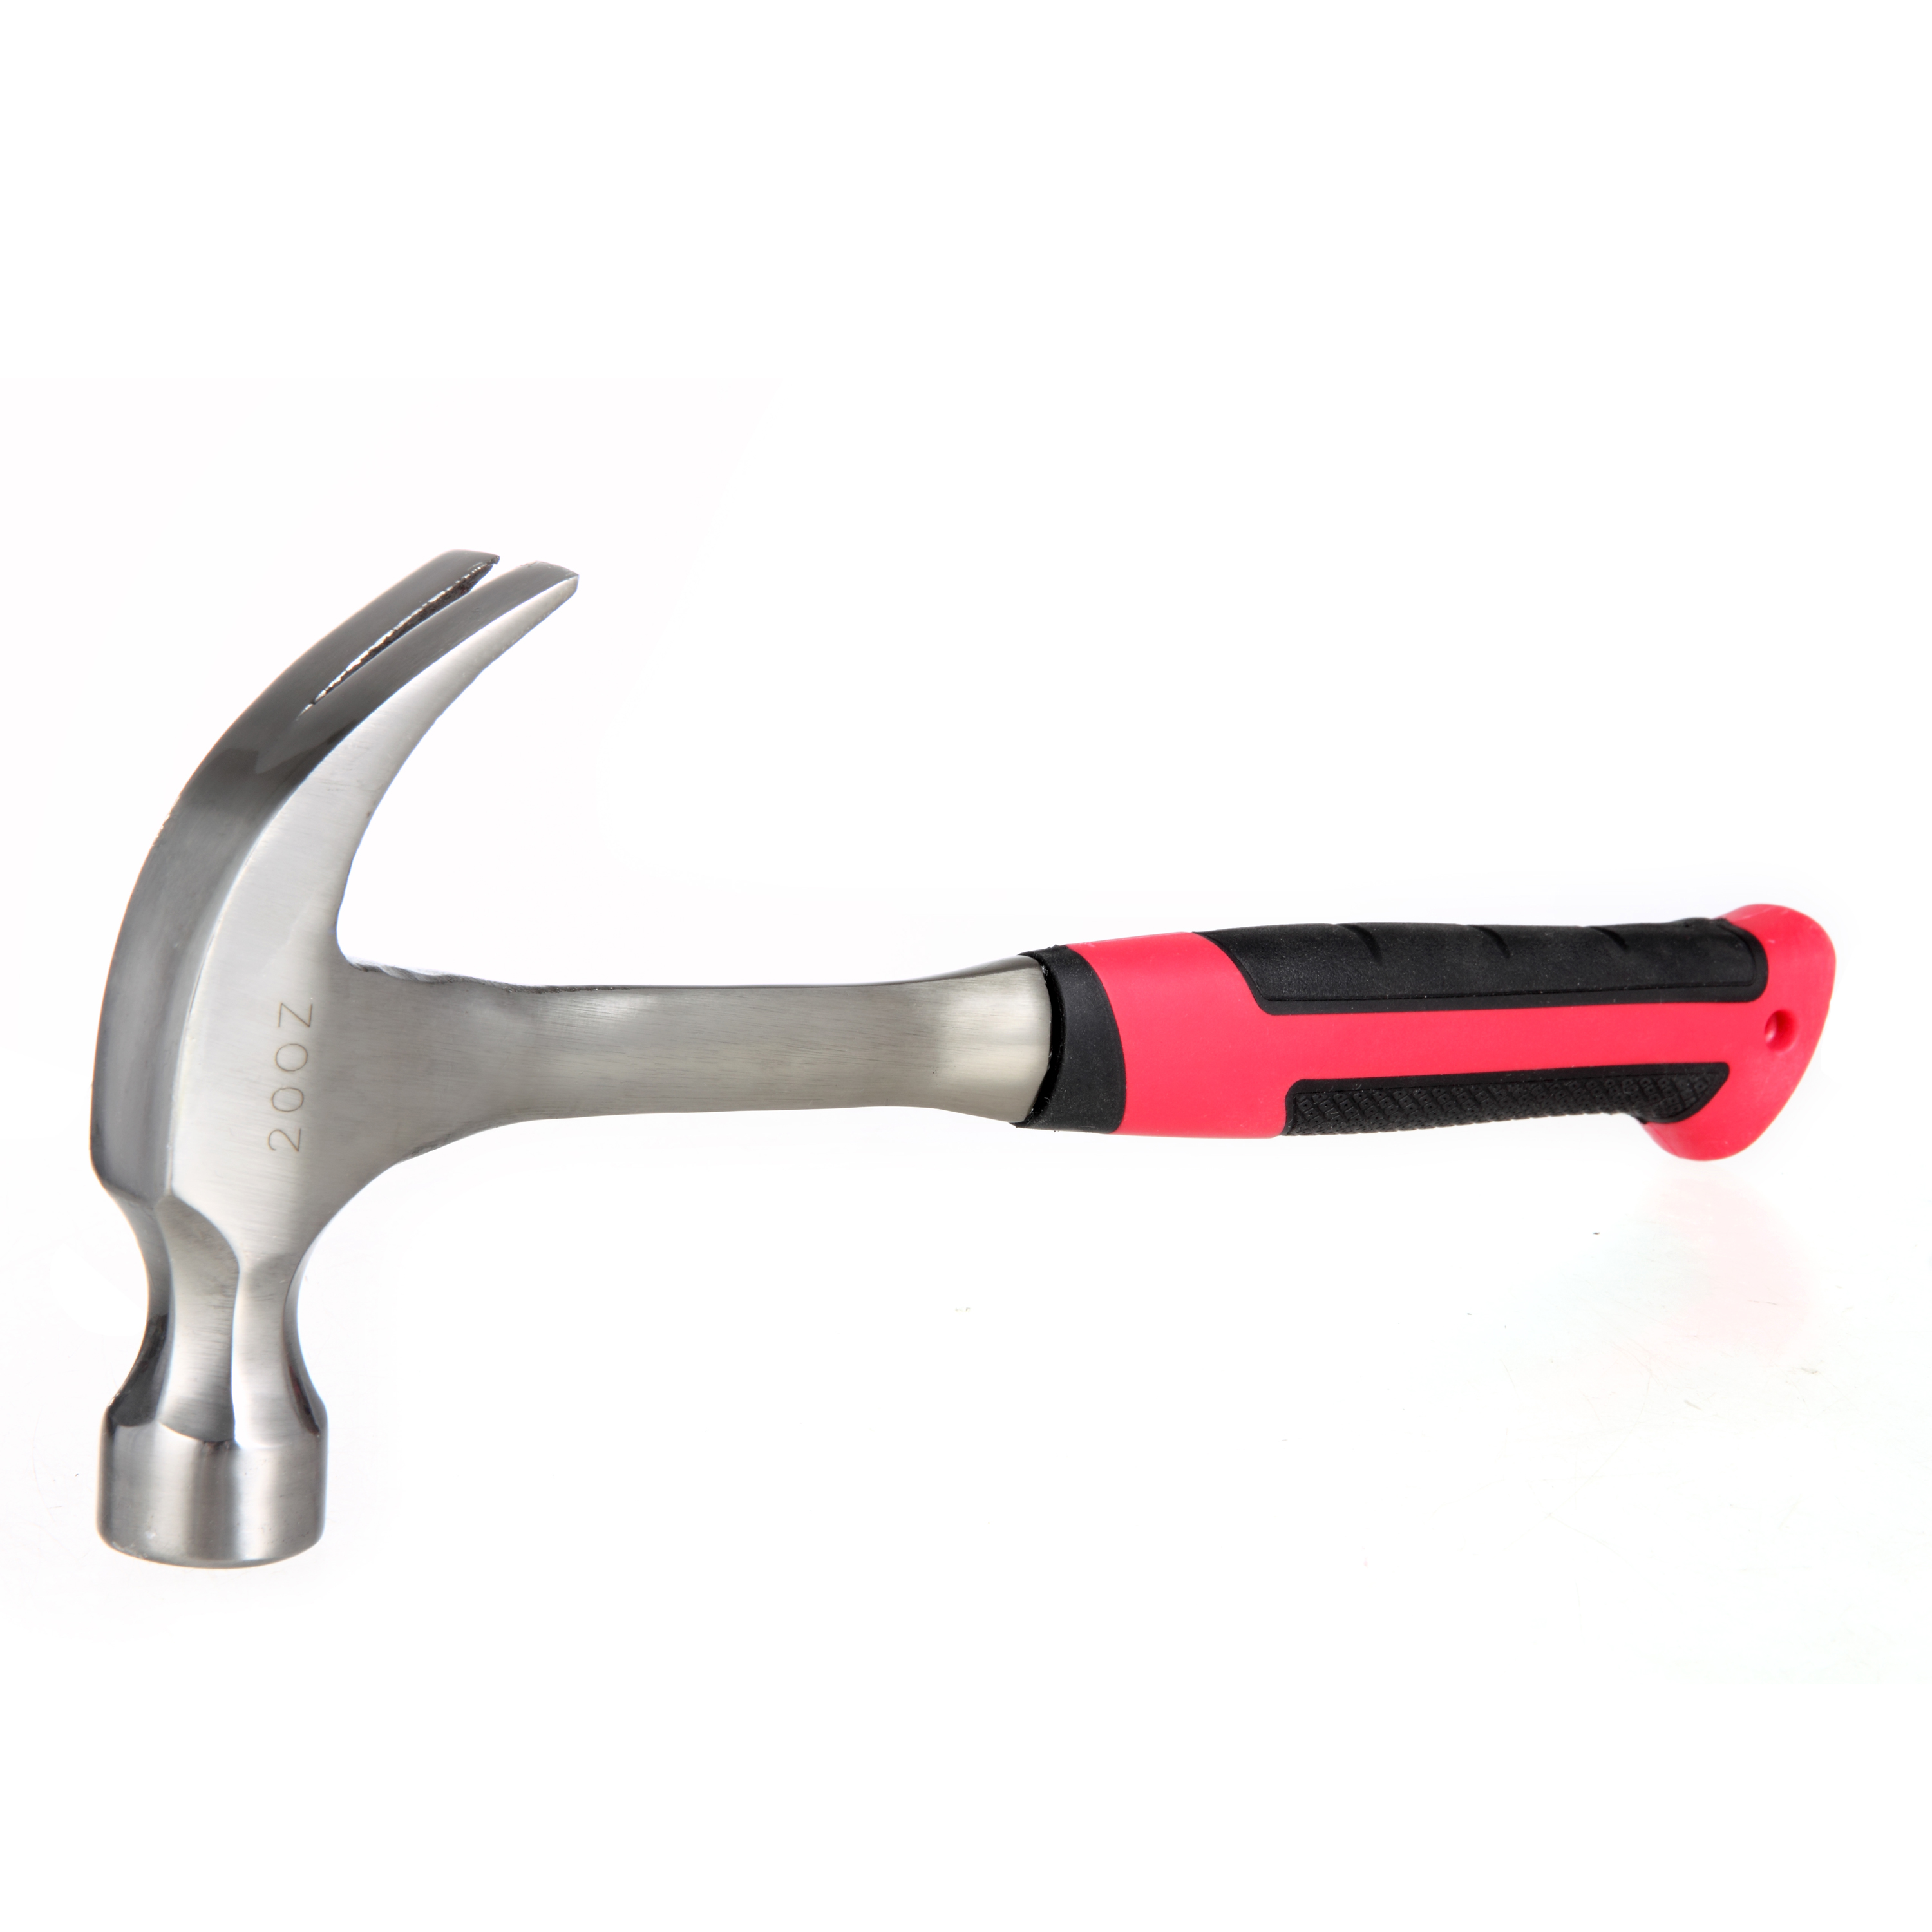 Hyper Tough 20 oz. Steel Shaft Claw Hammer with Comfort Grip TH20199A - image 3 of 12